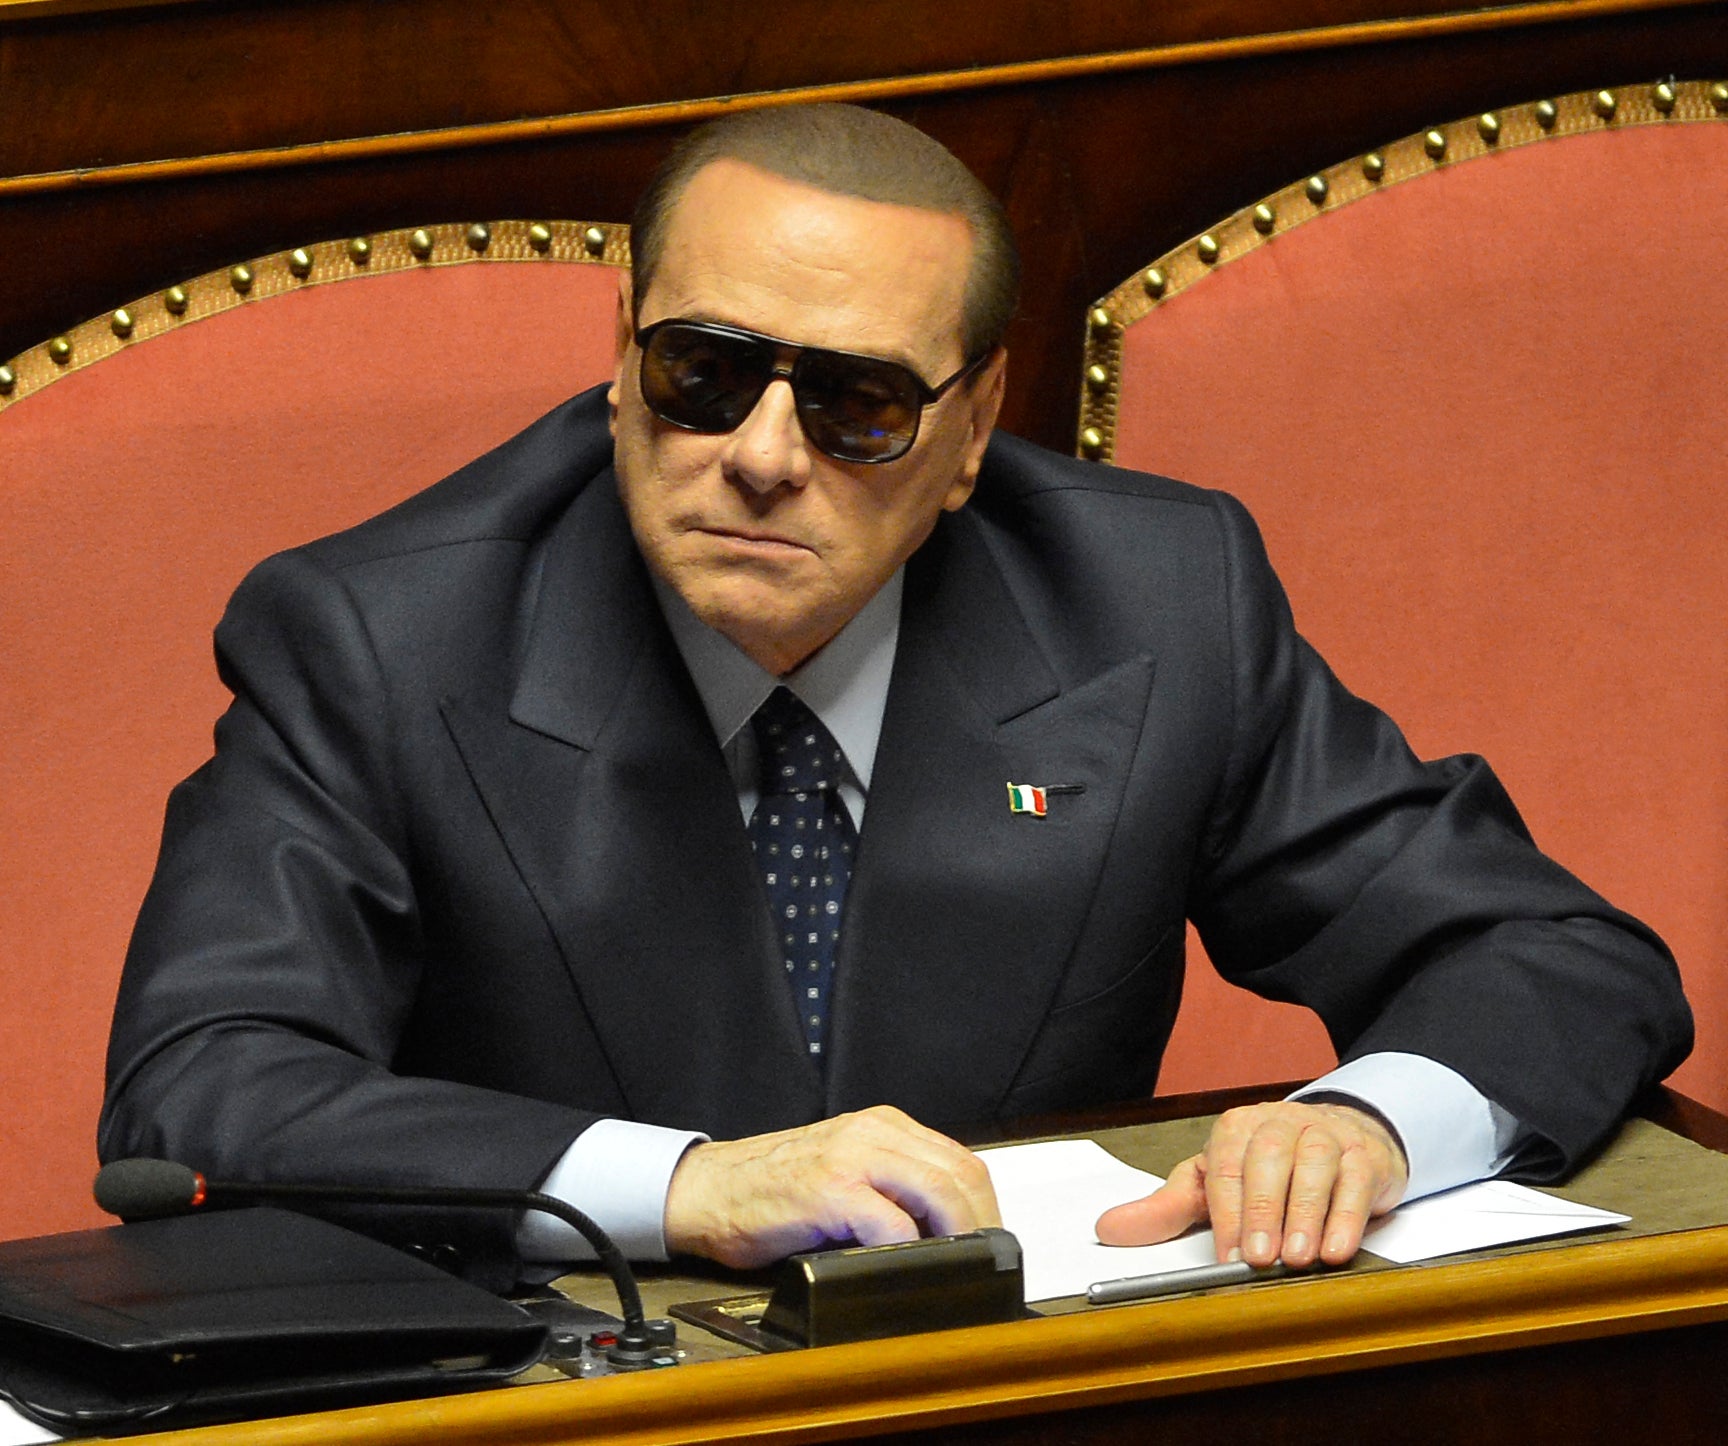 March 2013: Italy’s billionaire former Prime Minister Silvio Berlusconi is pictured at the Senate wearing sunglasses for medical reason